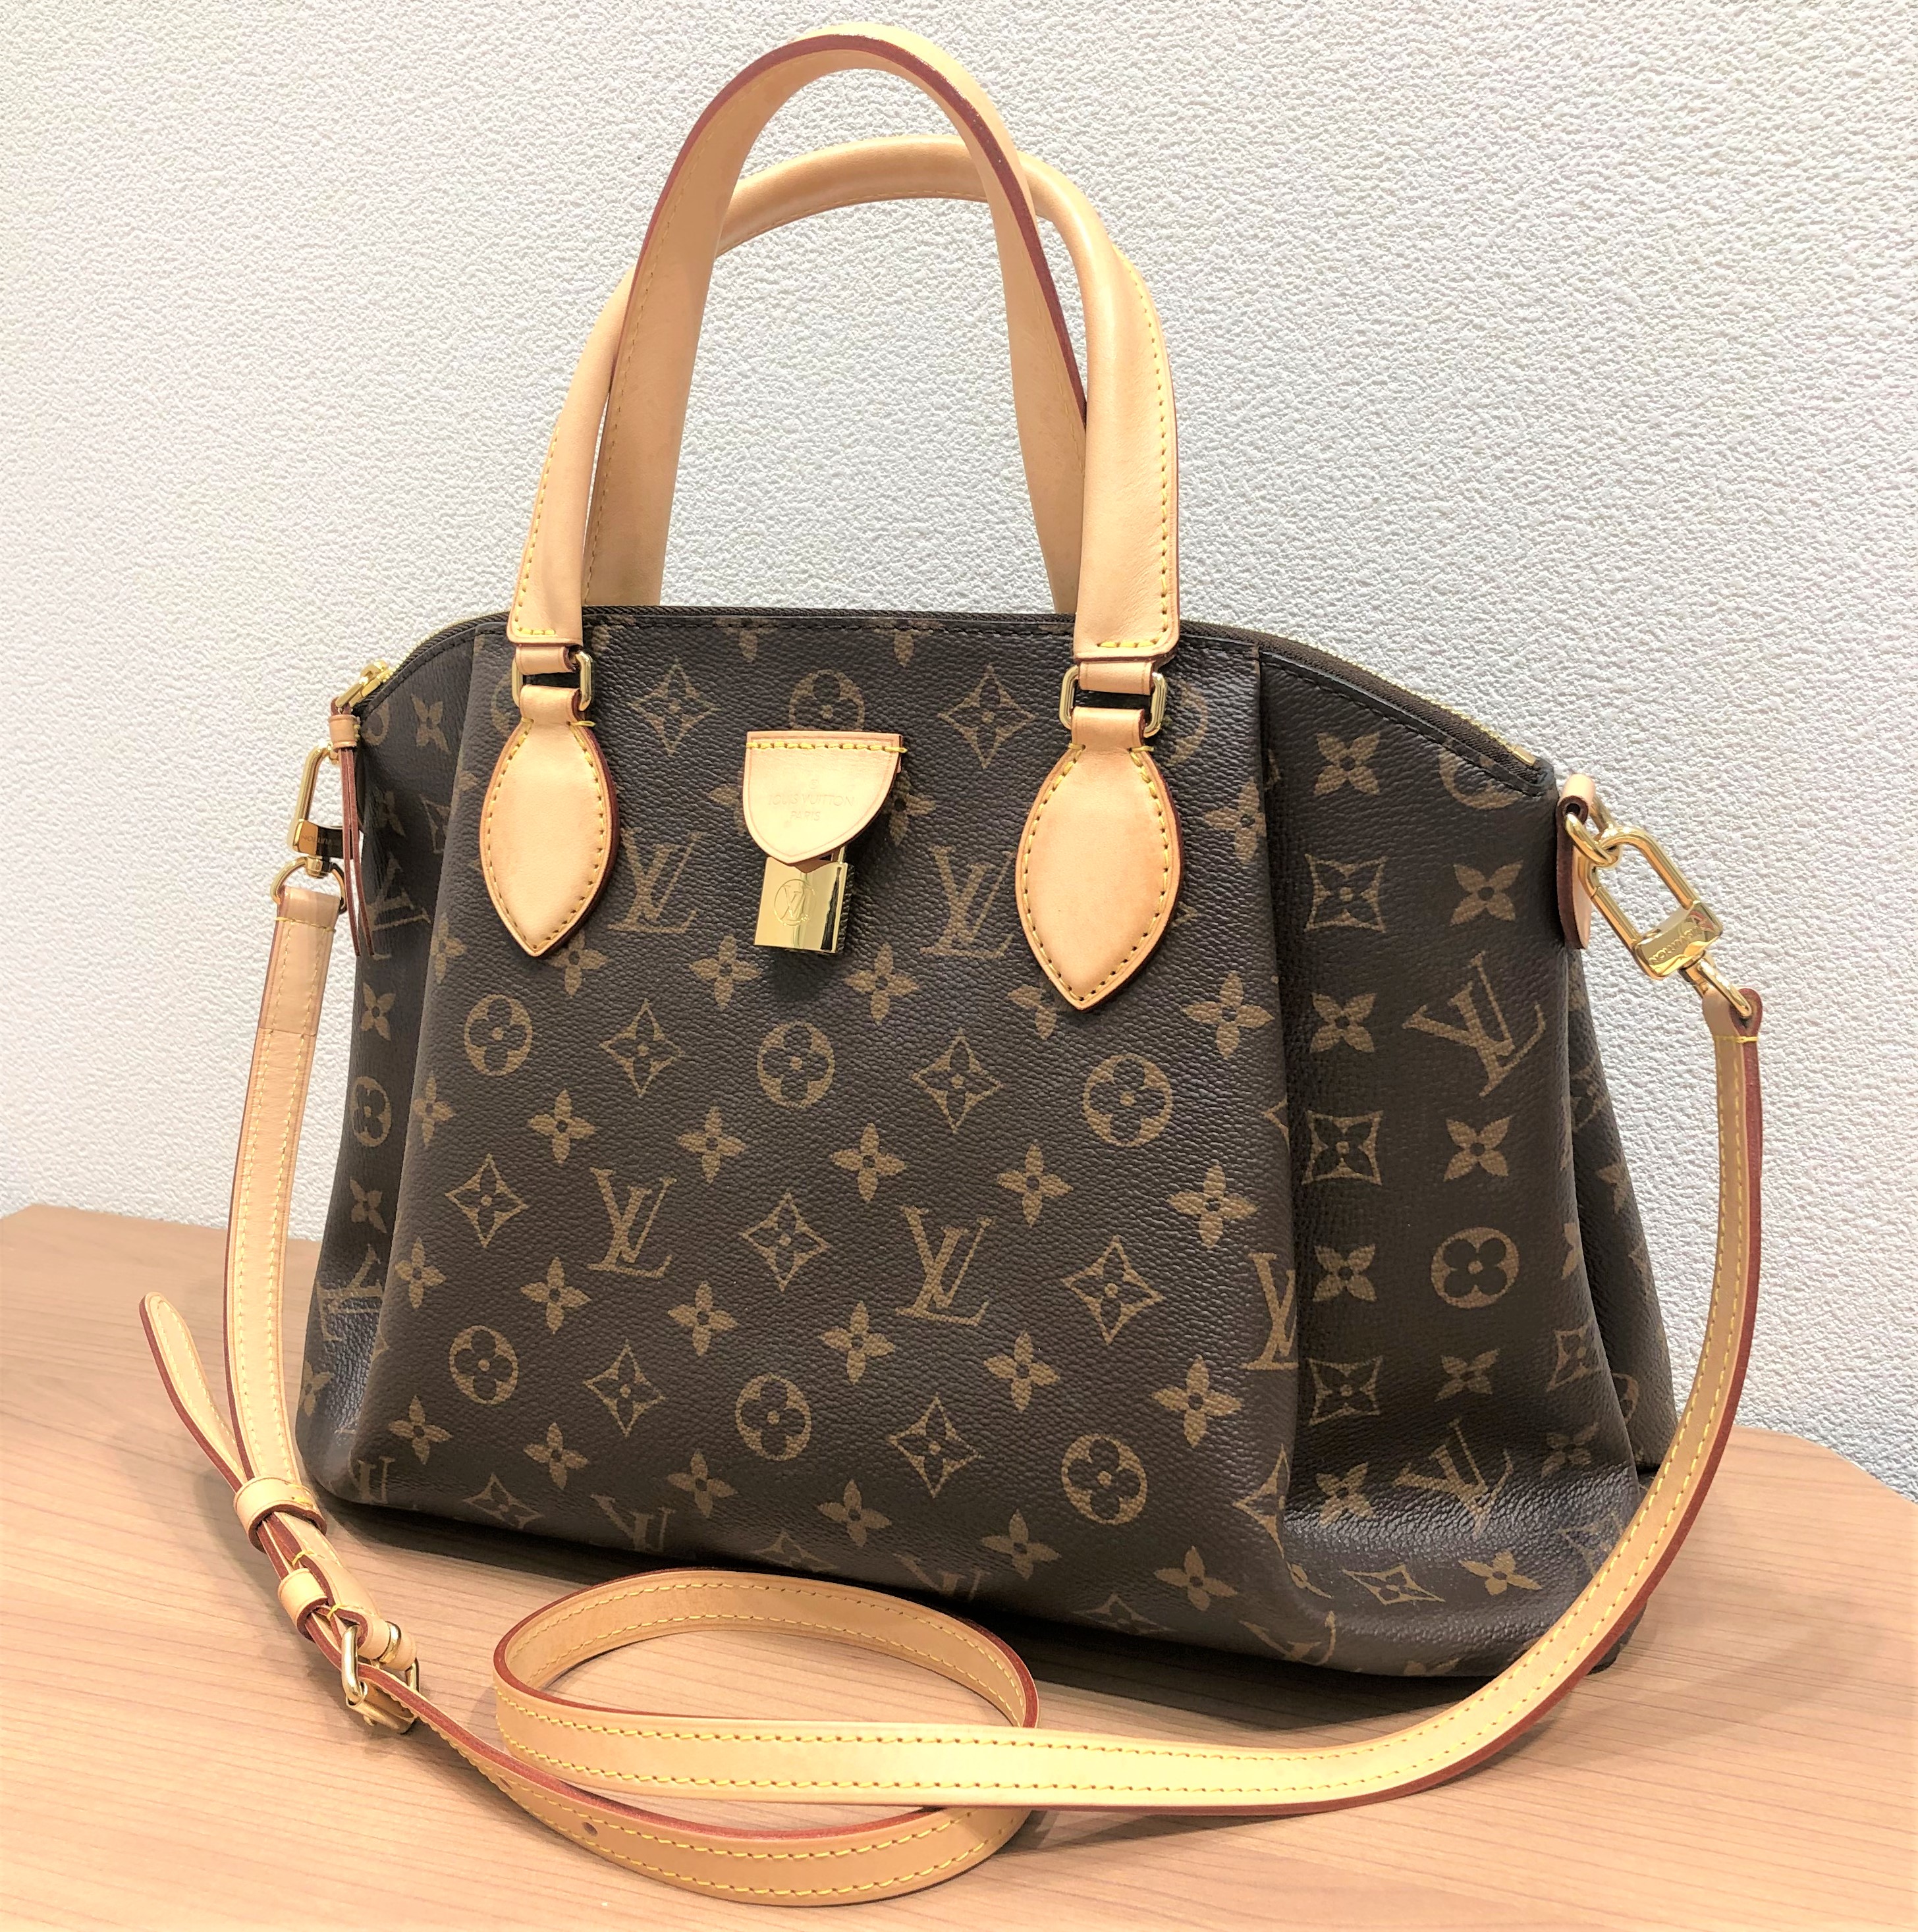 【LOUIS VUITTON/ルイヴィトン】 モノグラム リボリーMM M44546 2WAYバッグ